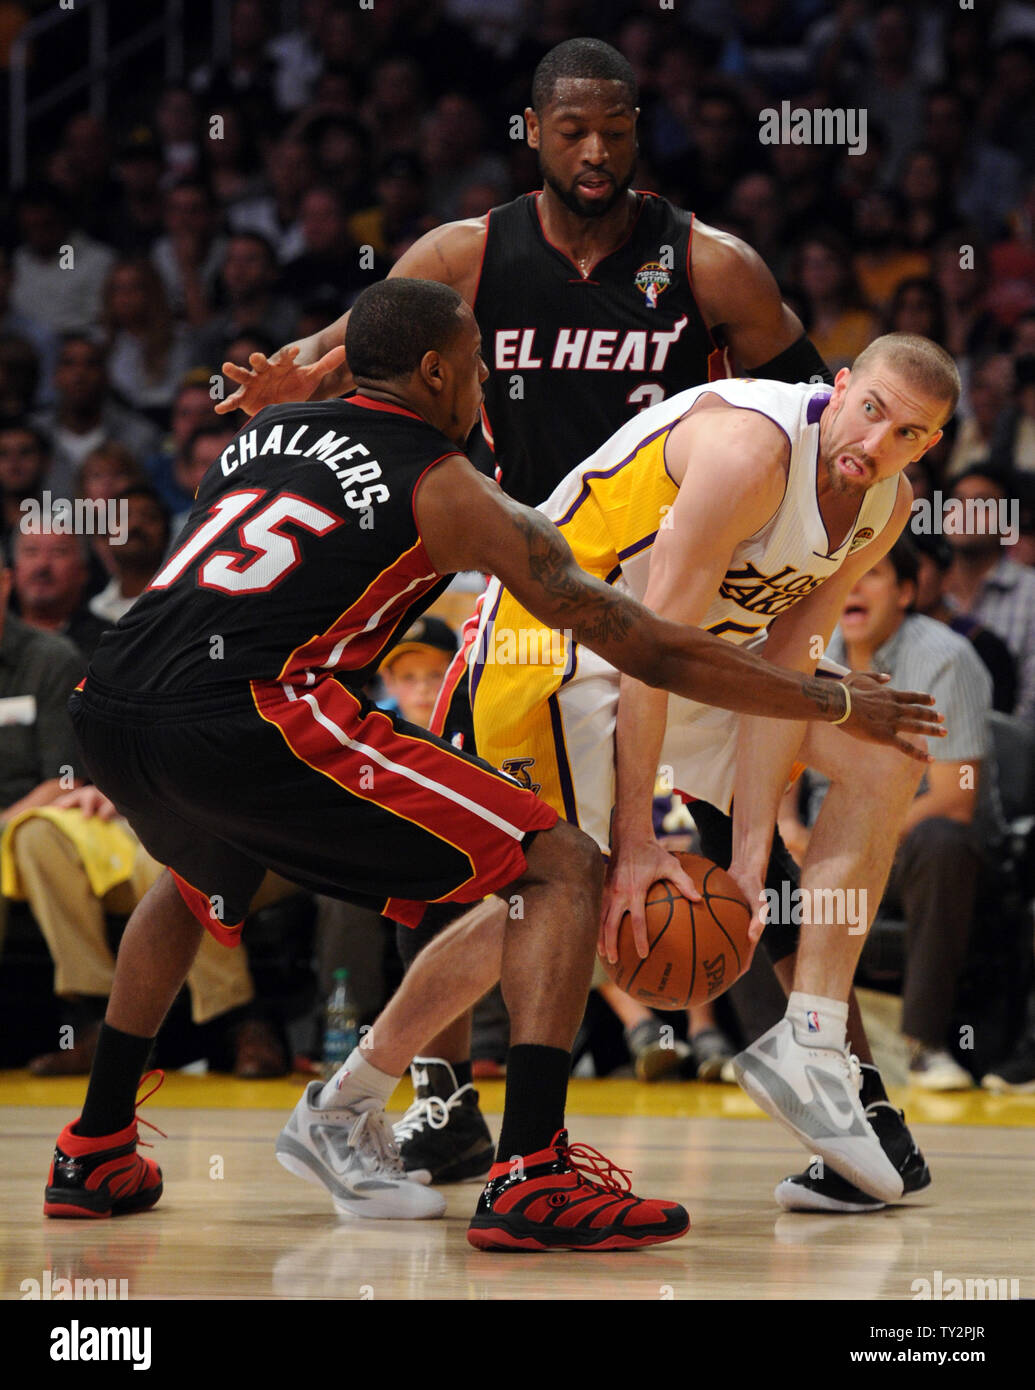 Los Angeles Lakers point guard Steve Blake (5) is trapped by Miami Heat shooting guard Dwyane Wade (3) and Mario Chalmers (15) in the first half of  their NBA basketball game in Los Angeles on March 4, 2012.    UPI/Lori Shepler Stock Photo